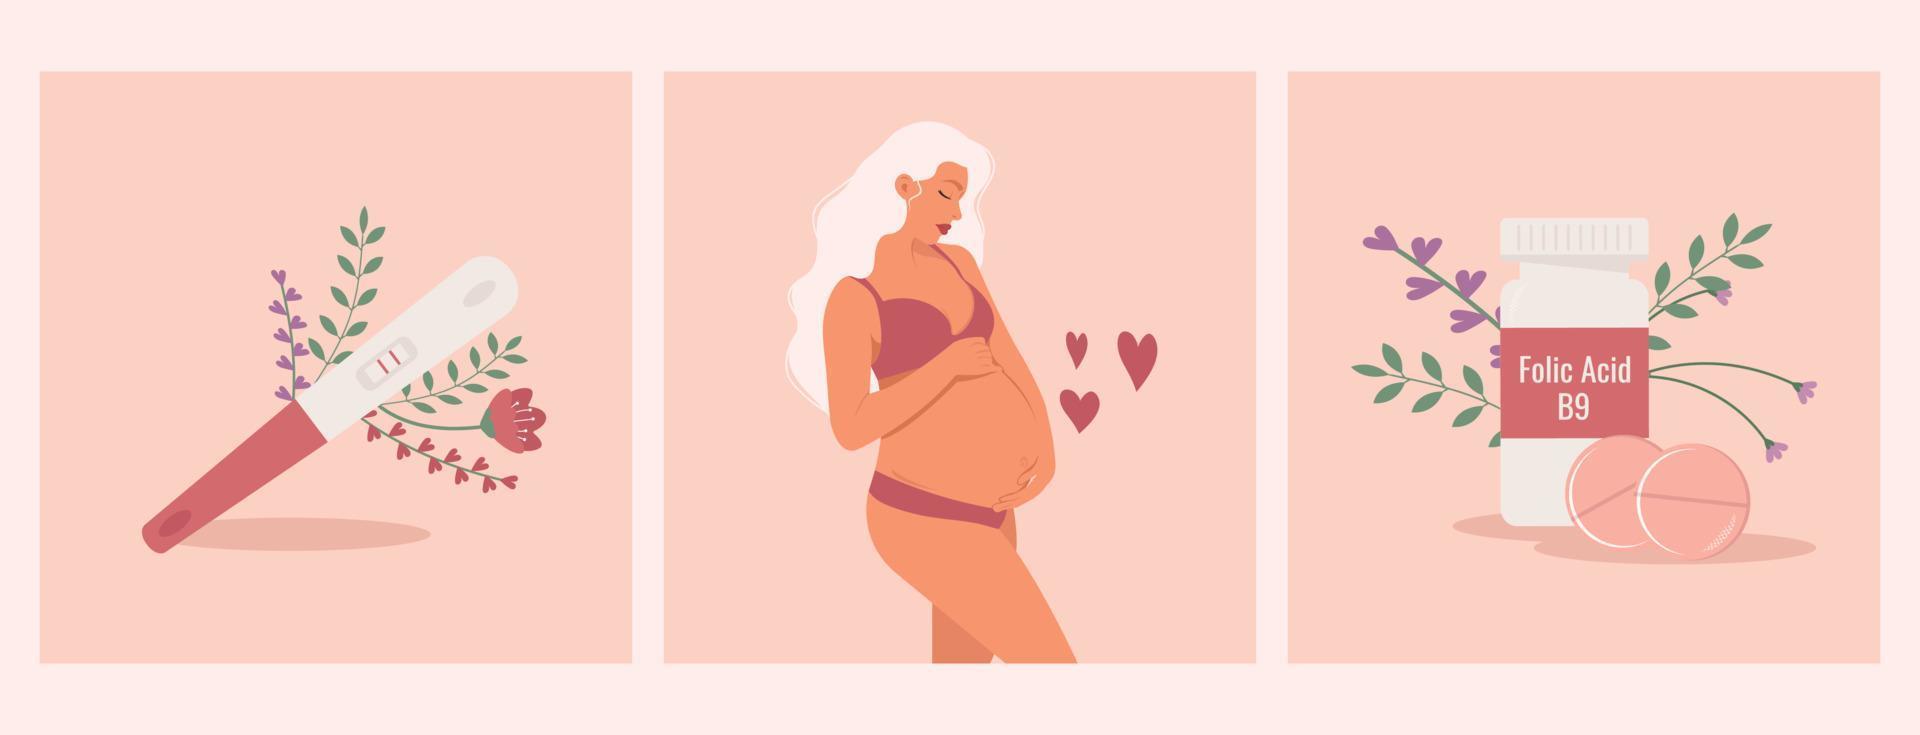 Set of illustrations on pregnancy and planning, taking folic acid, reproductive health, pregnancy test. Vector